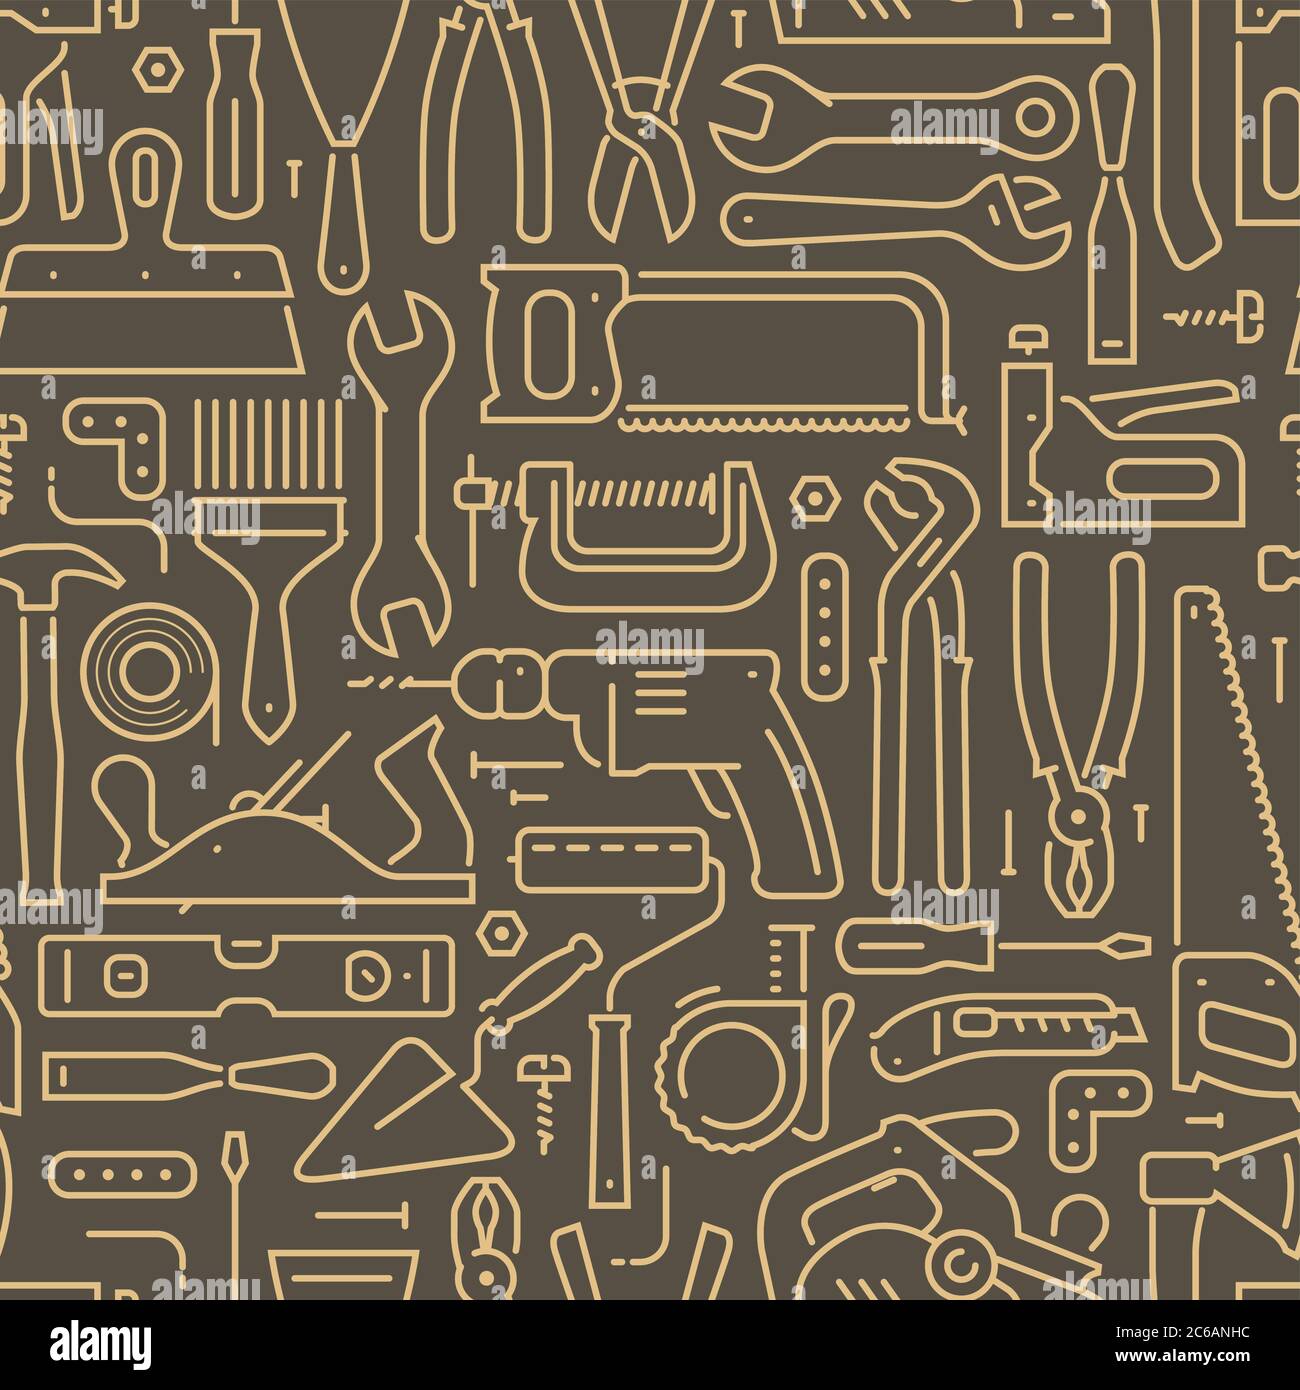 Tools seamless background. Construction, repair pattern vector